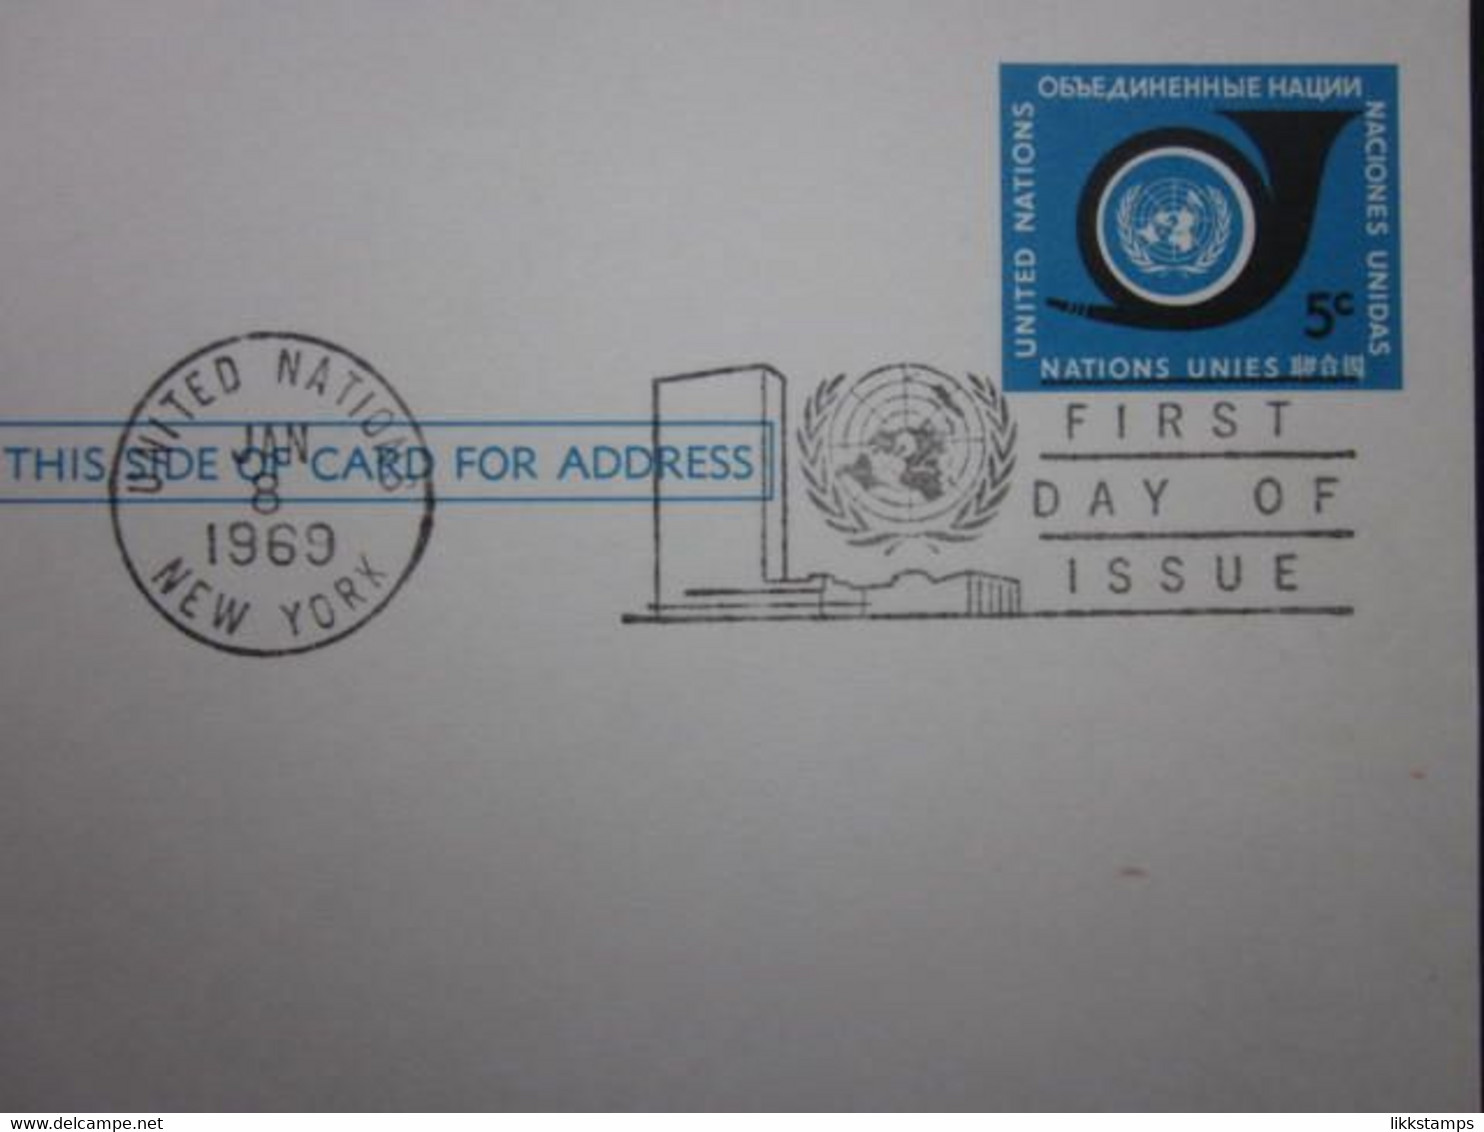 A GROUP OF SEVEN 1960's UNITED NATIONS POSTAL CARDS WITH FIRST DAY OF ISSUE POSTMARKS. ( 02227 ) - Covers & Documents